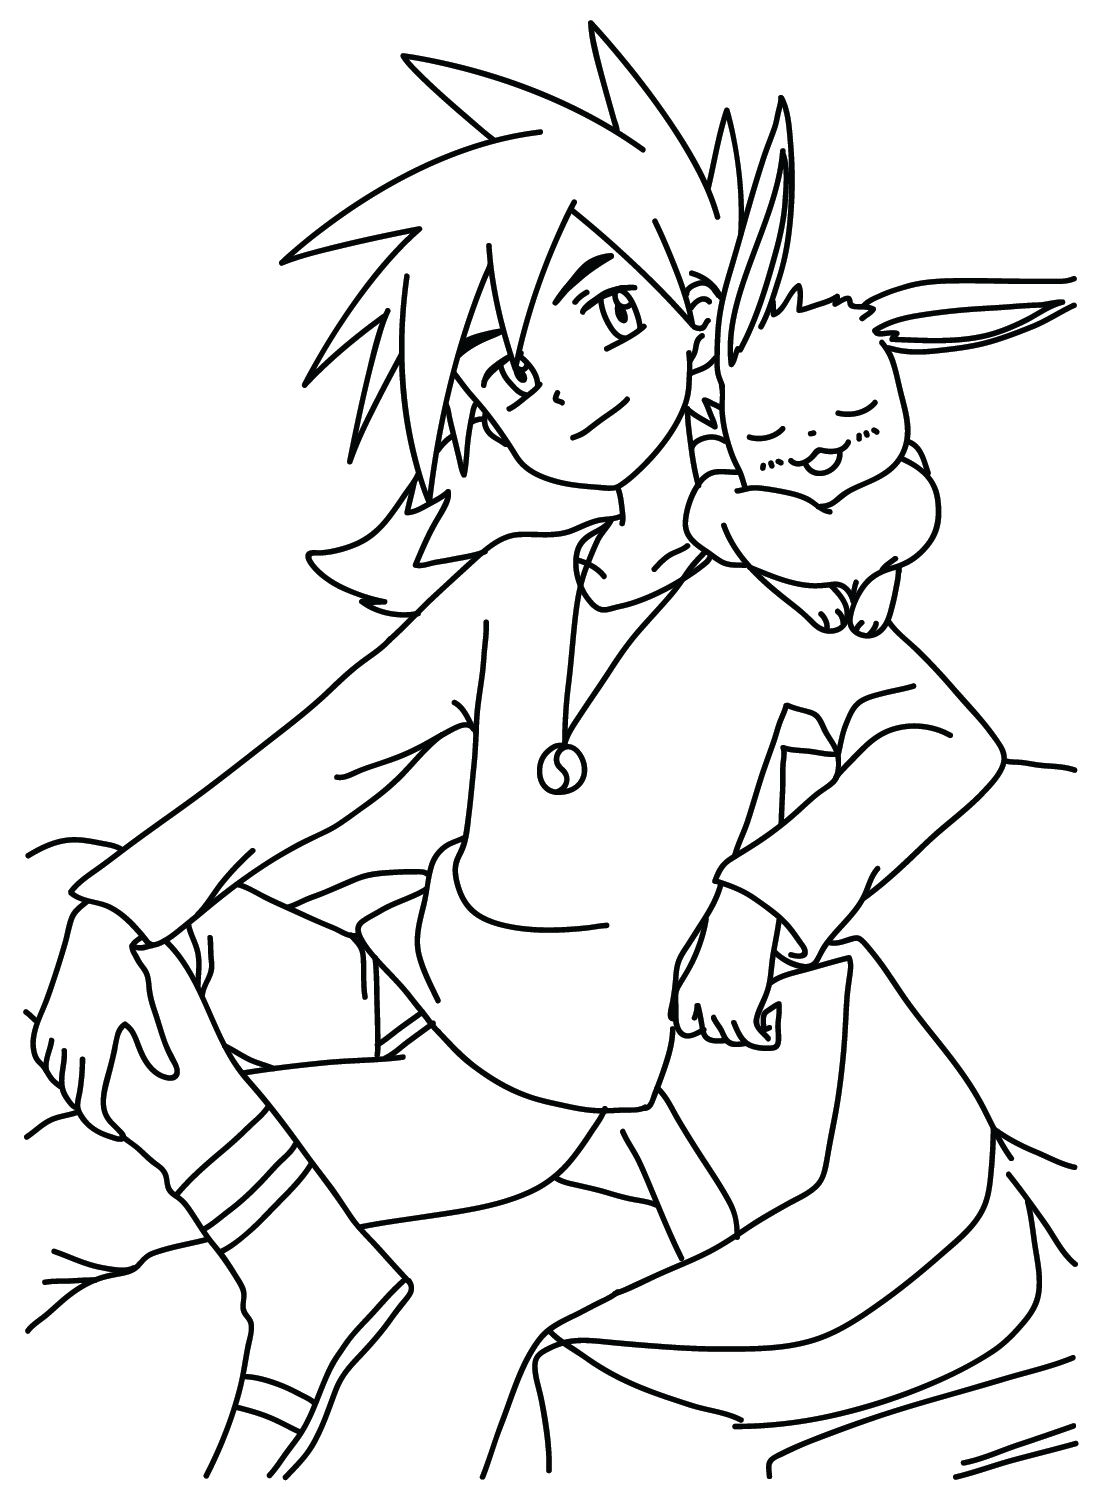 Gary Oak and Eevee Pokemon Pictures to Color from Eevee